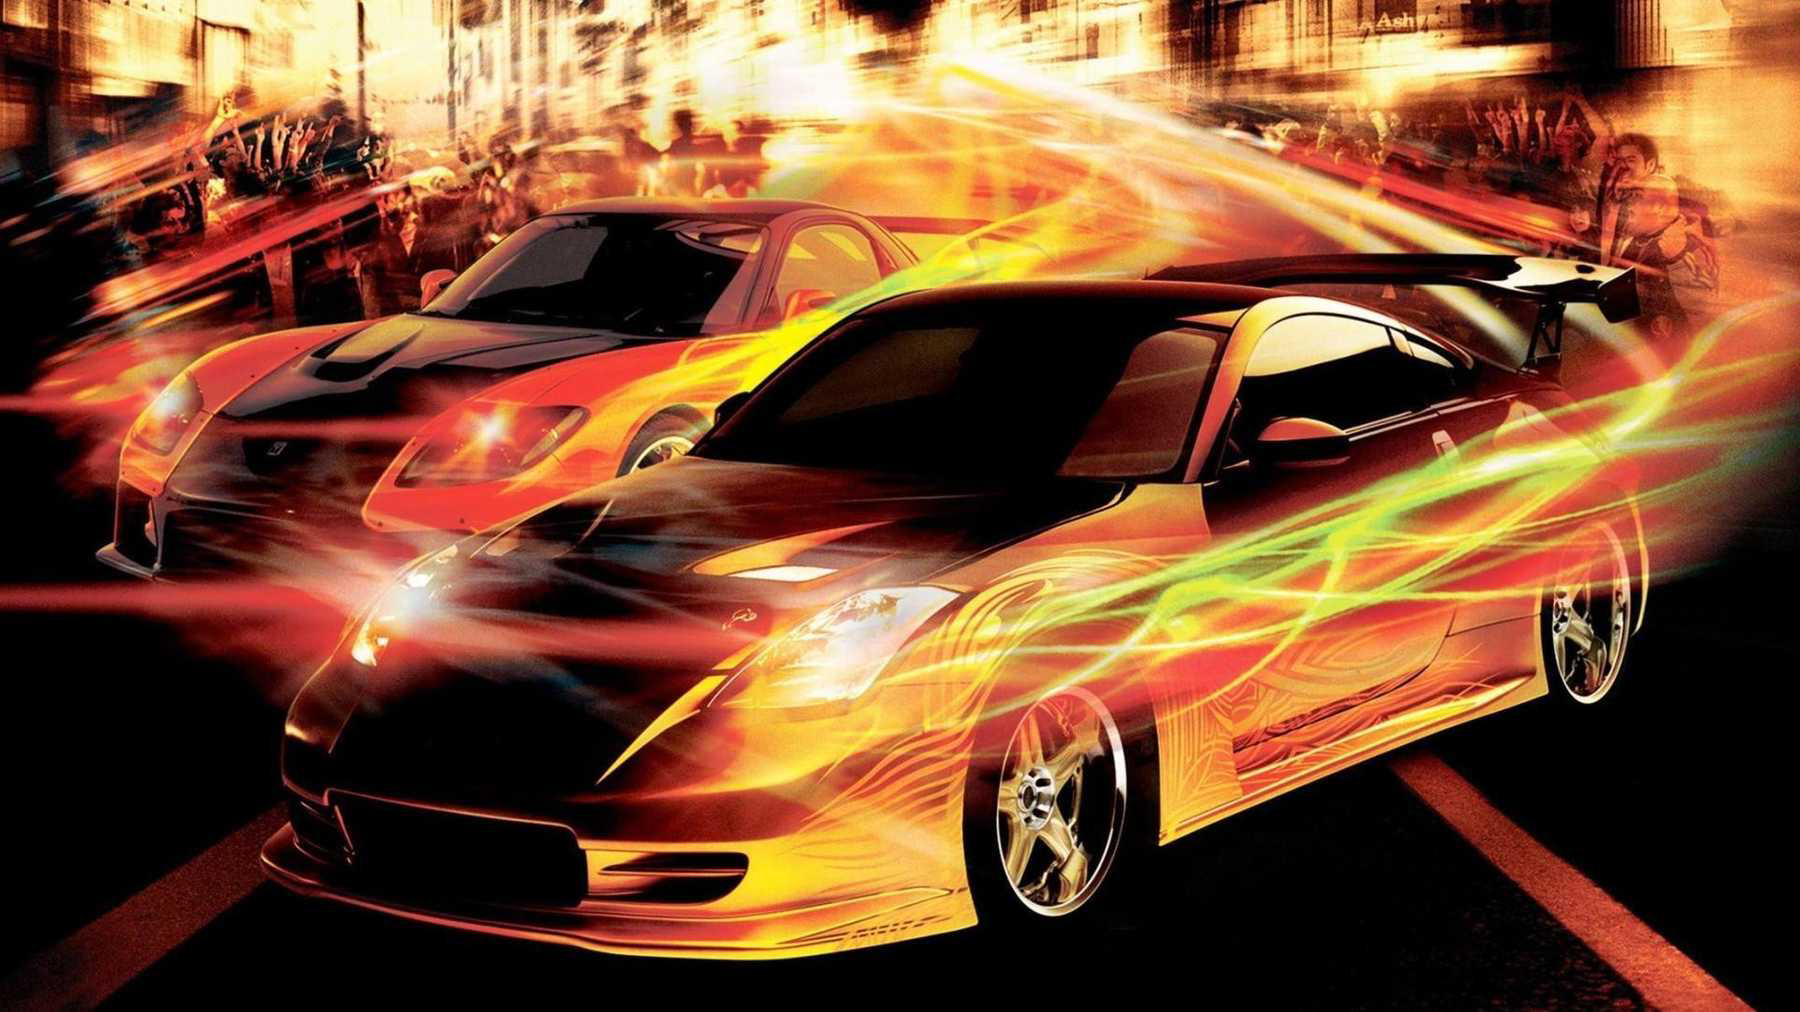 1. Fast and Furious Cars